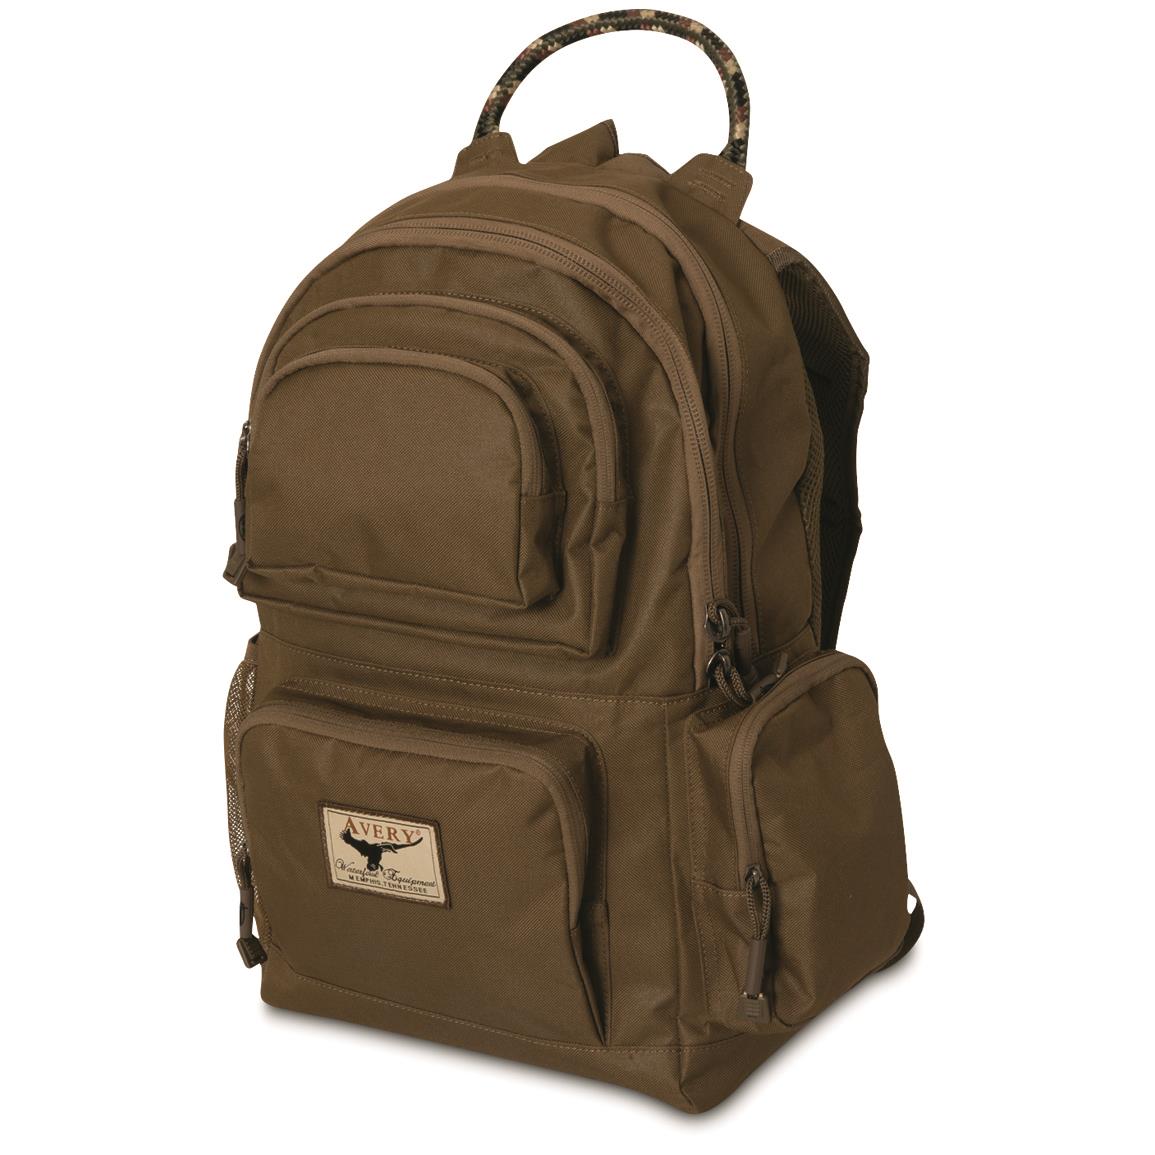 Avery Waterfowler's Day Pack